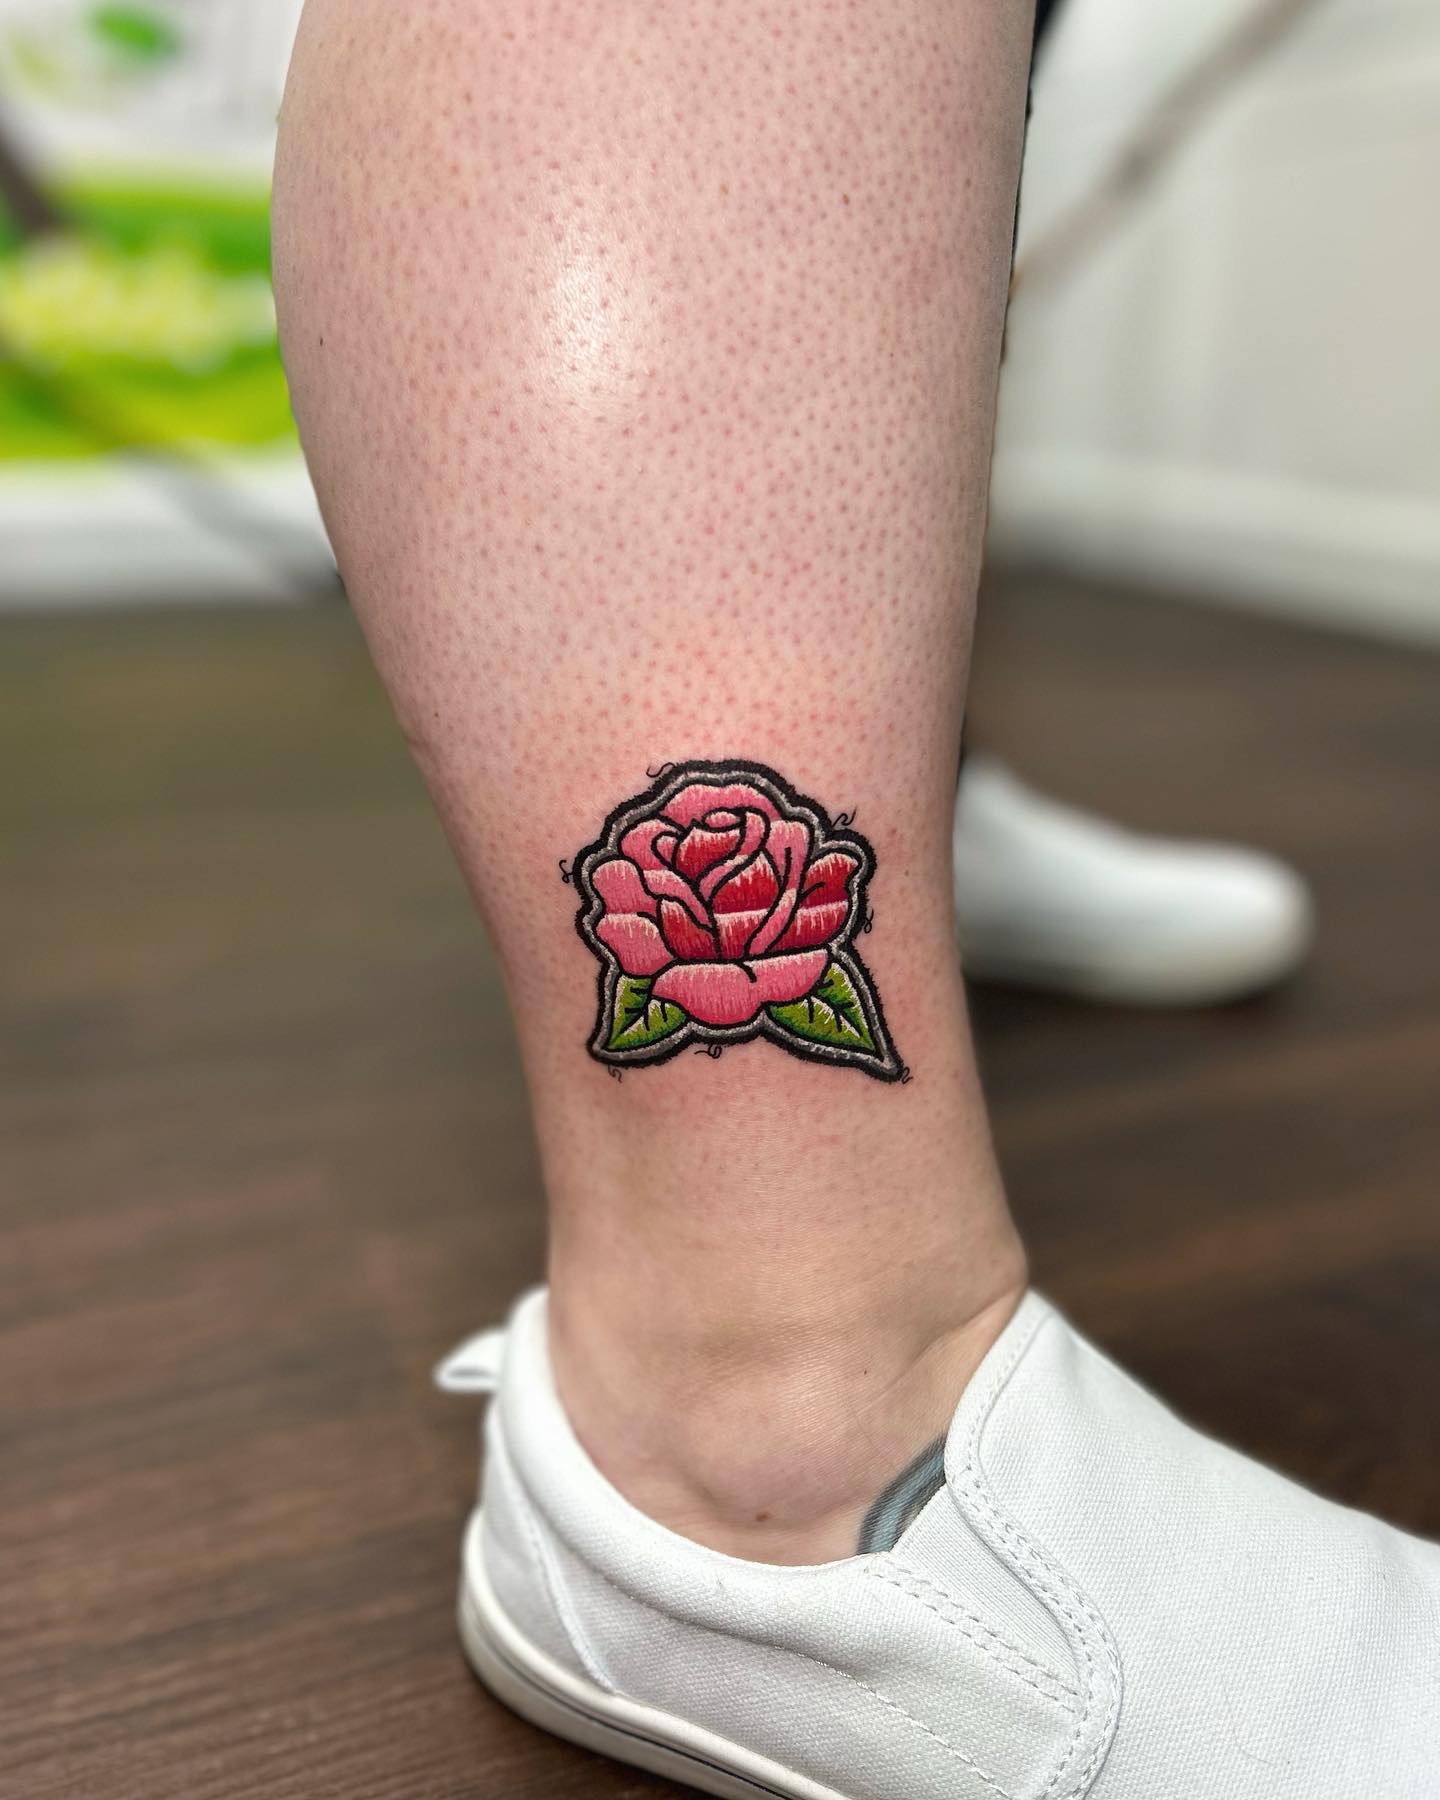 Small rose embroidery tattoo on ankle